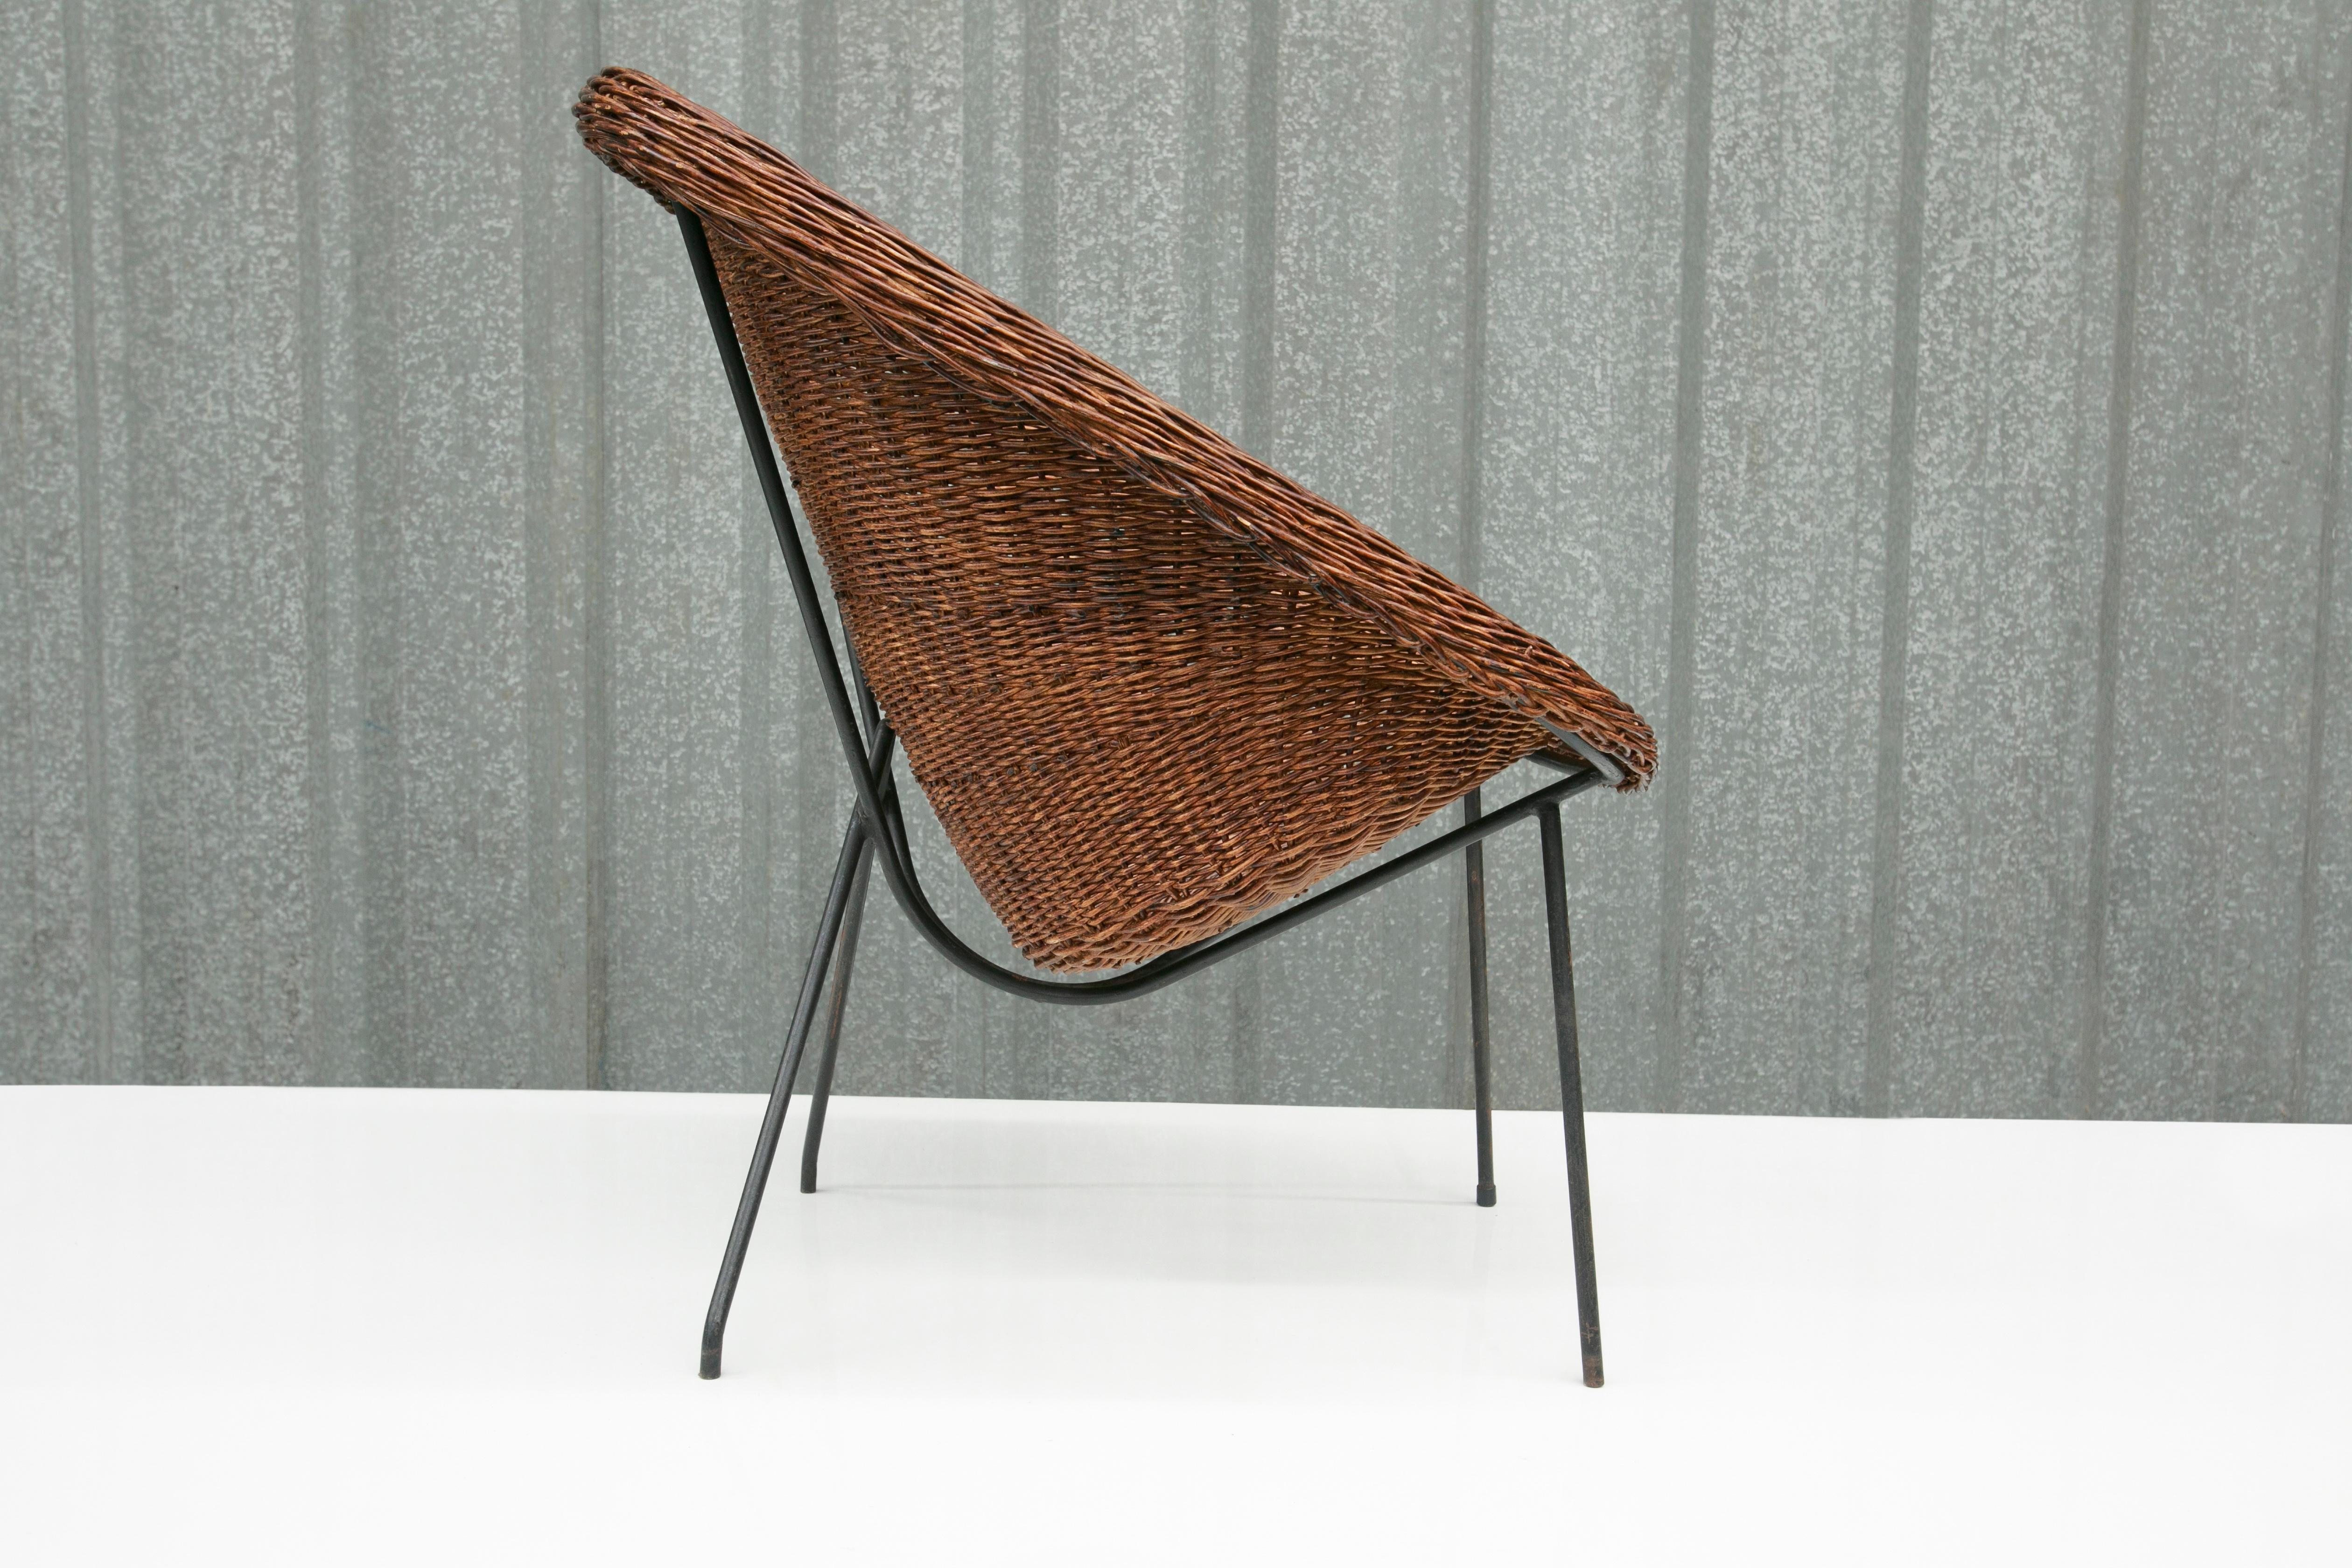 Caning Brazilian Modern Chair in Cane & Iron by Carlo Hauner & Martin Eisler, 1955 For Sale